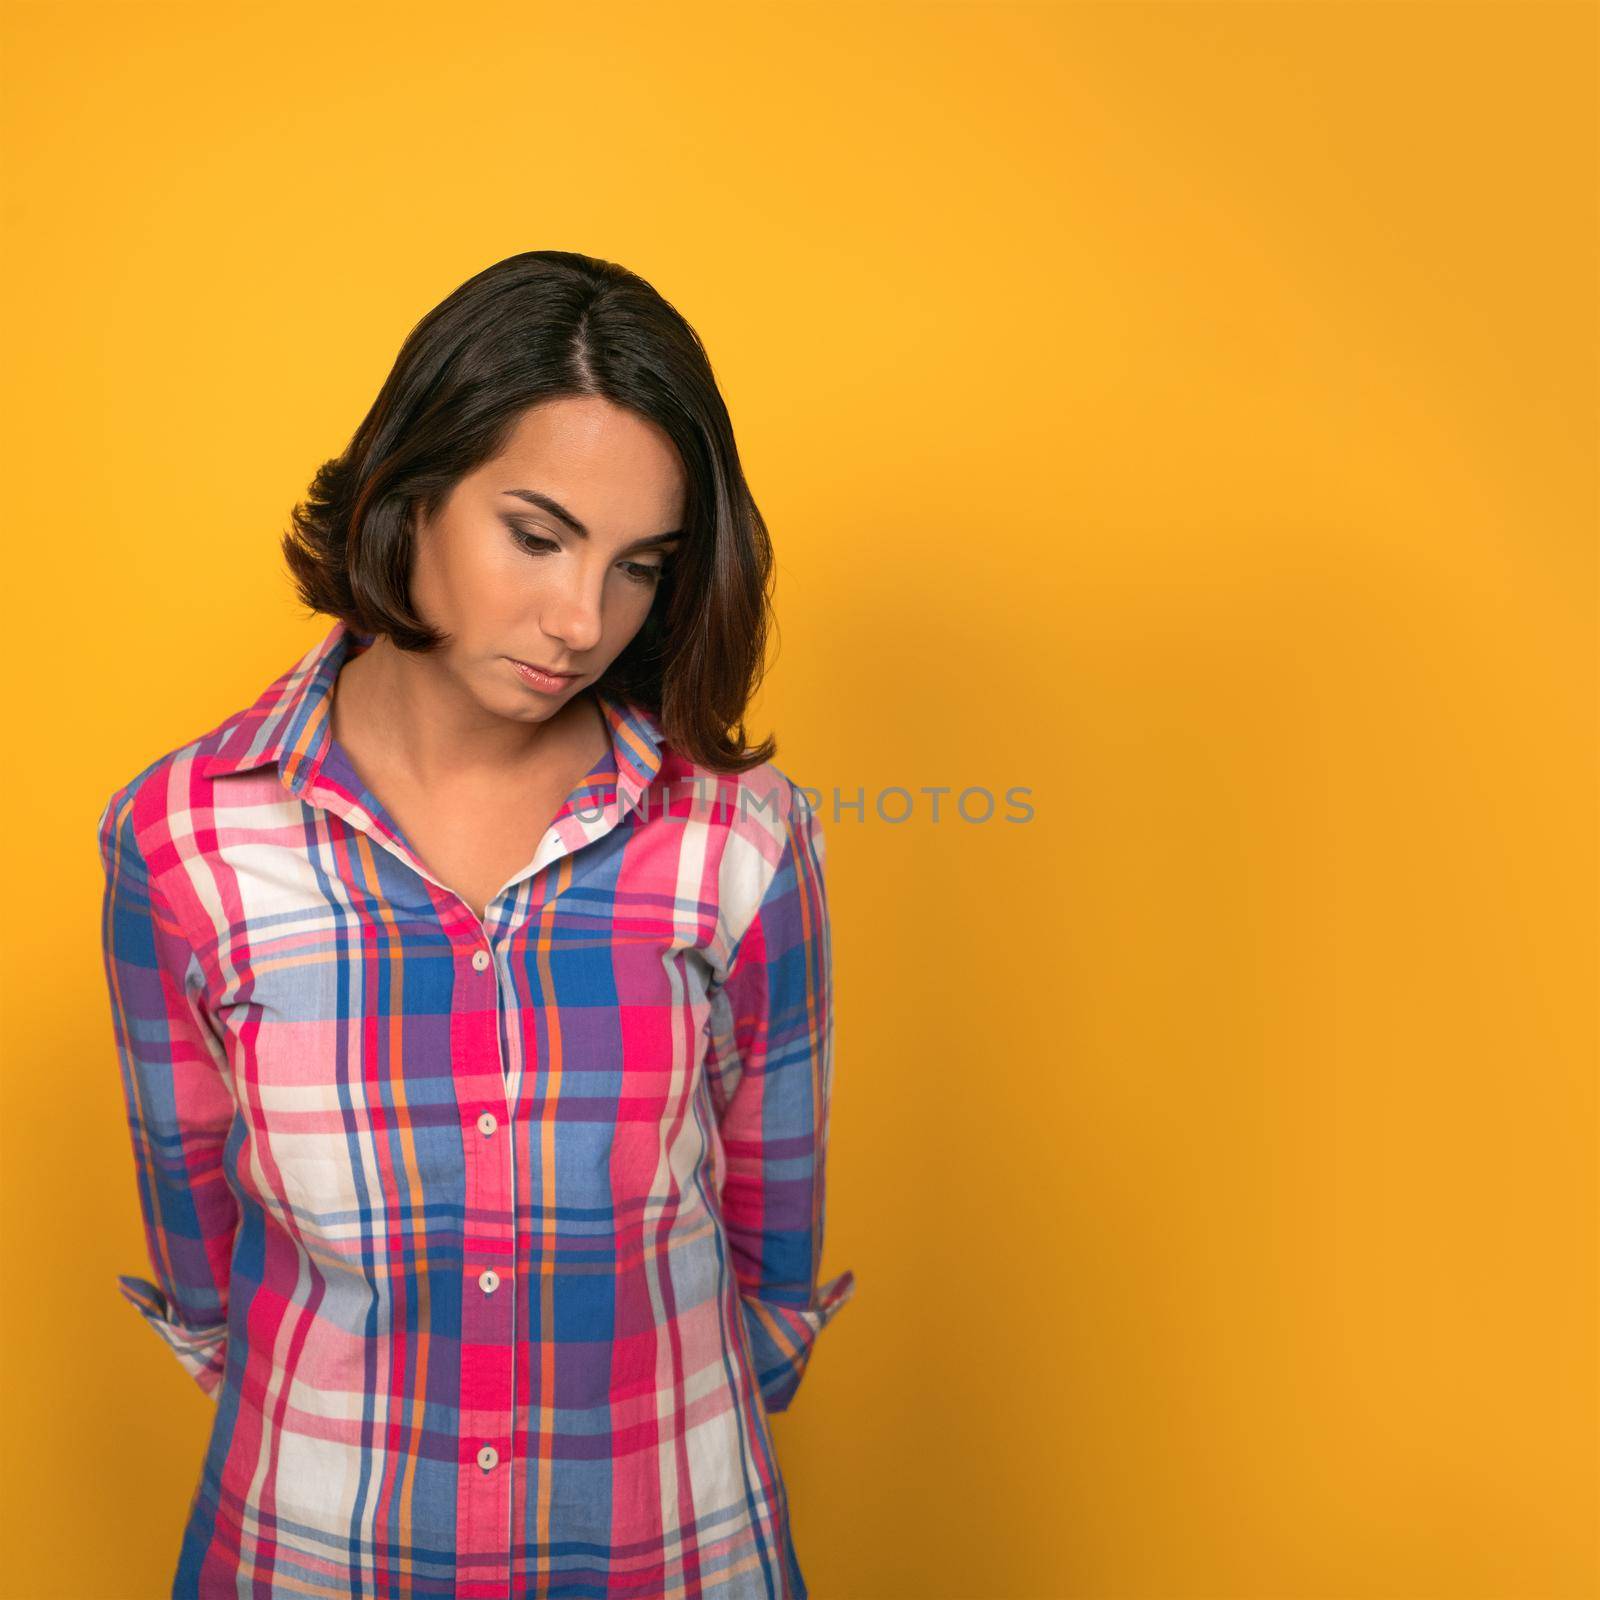 Young Sad pensive woman feels guilty, thinks looking down while standing against of yellow wall in background with copy space on right side.